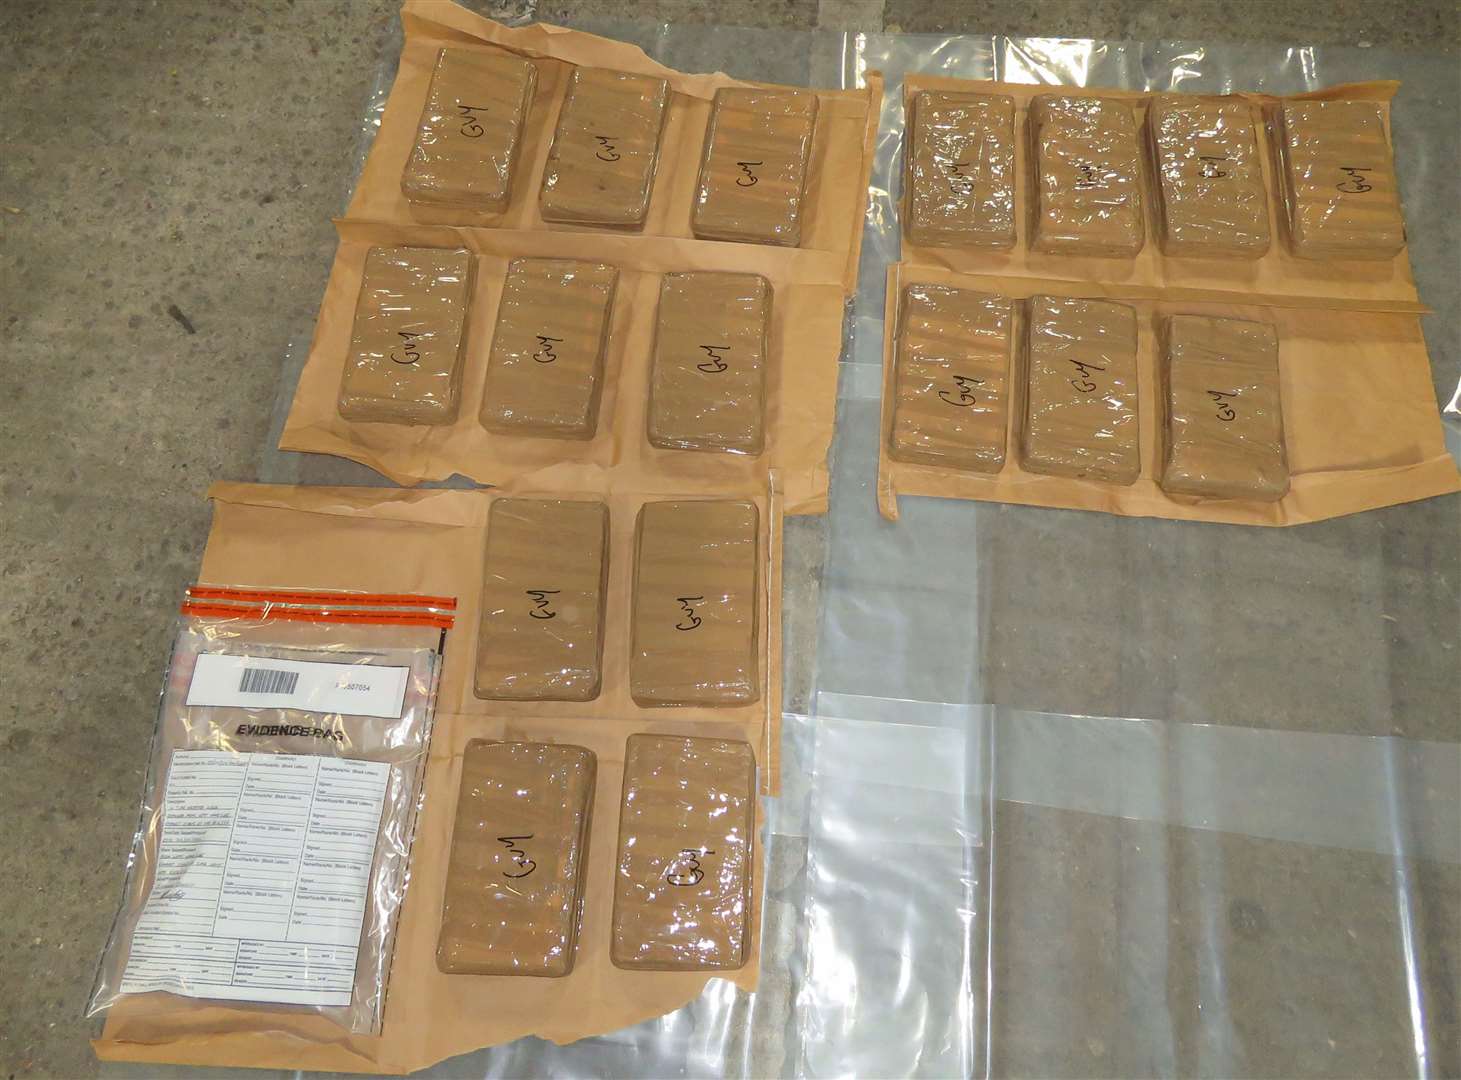 Cocaine was found in a lorry compartment. Photo: NCA